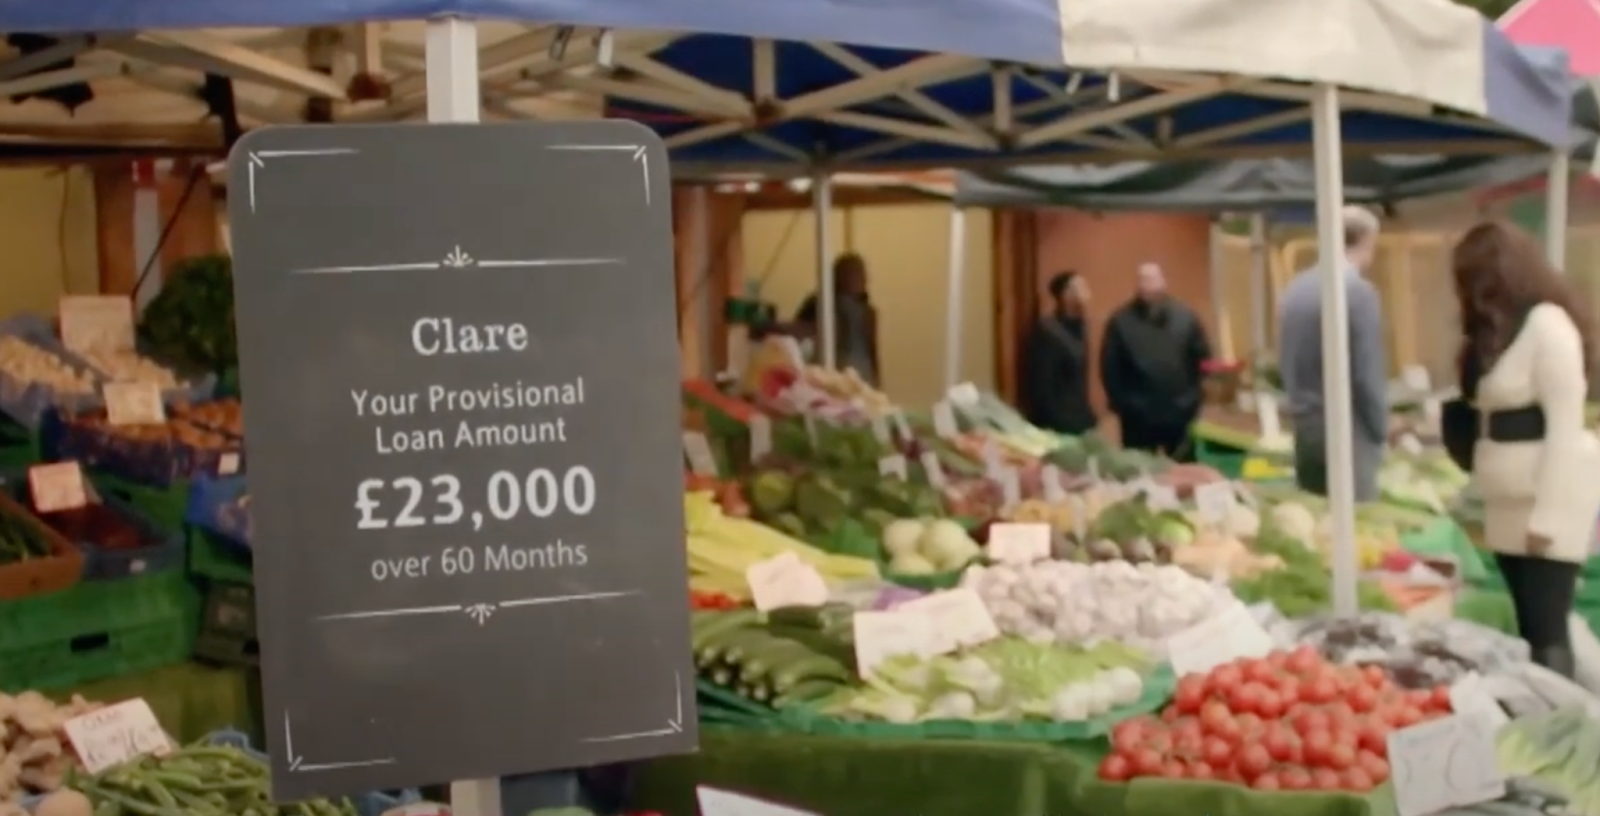 A chalk board at a market addressed to "Clare" demonstrating marketing personalisation in action